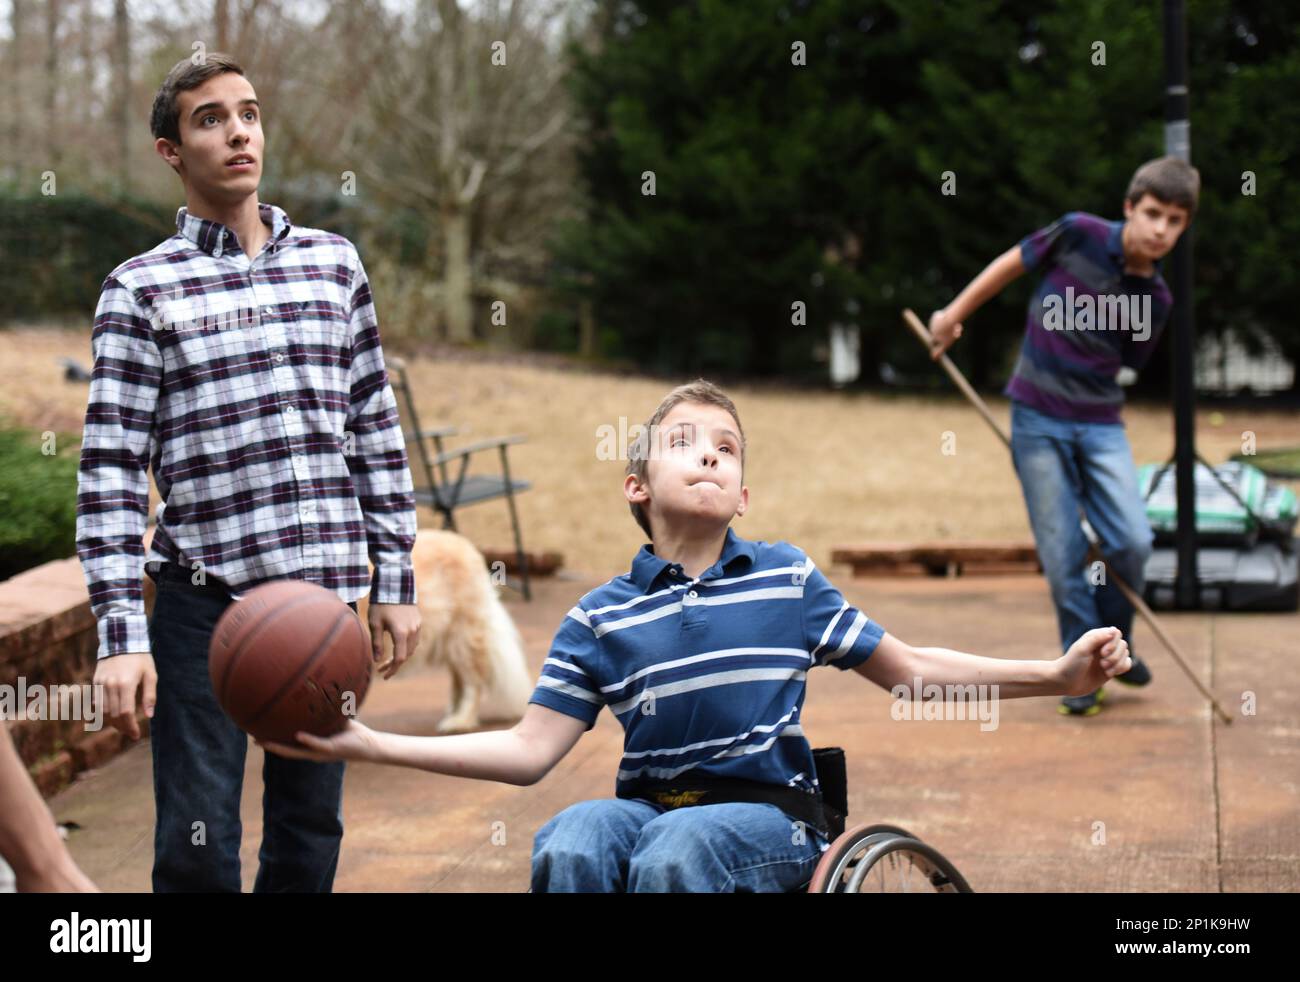 Zachary (10) gets off a shot as his brothers Samuel (16) and and Ethan (12) look at their home on Tuesday, February 16, 2016 in Villa Rica, Ga. Julie and Alex Armas have three sons and two of them, Samuel (16) and Zachary (10), have spina bifida. Julie had fetal surgery during her pregnancy with Samuel in hopes of repairing the lesion on his back. USA Today covered the controversial surgery and a photographer captured what has since become the famous "Hand of Hope", which captured Samuel's hand (at 21 weeks gestation) wrapped around the surgeon's finger. Since then, the Armas family has experi Stock Photo